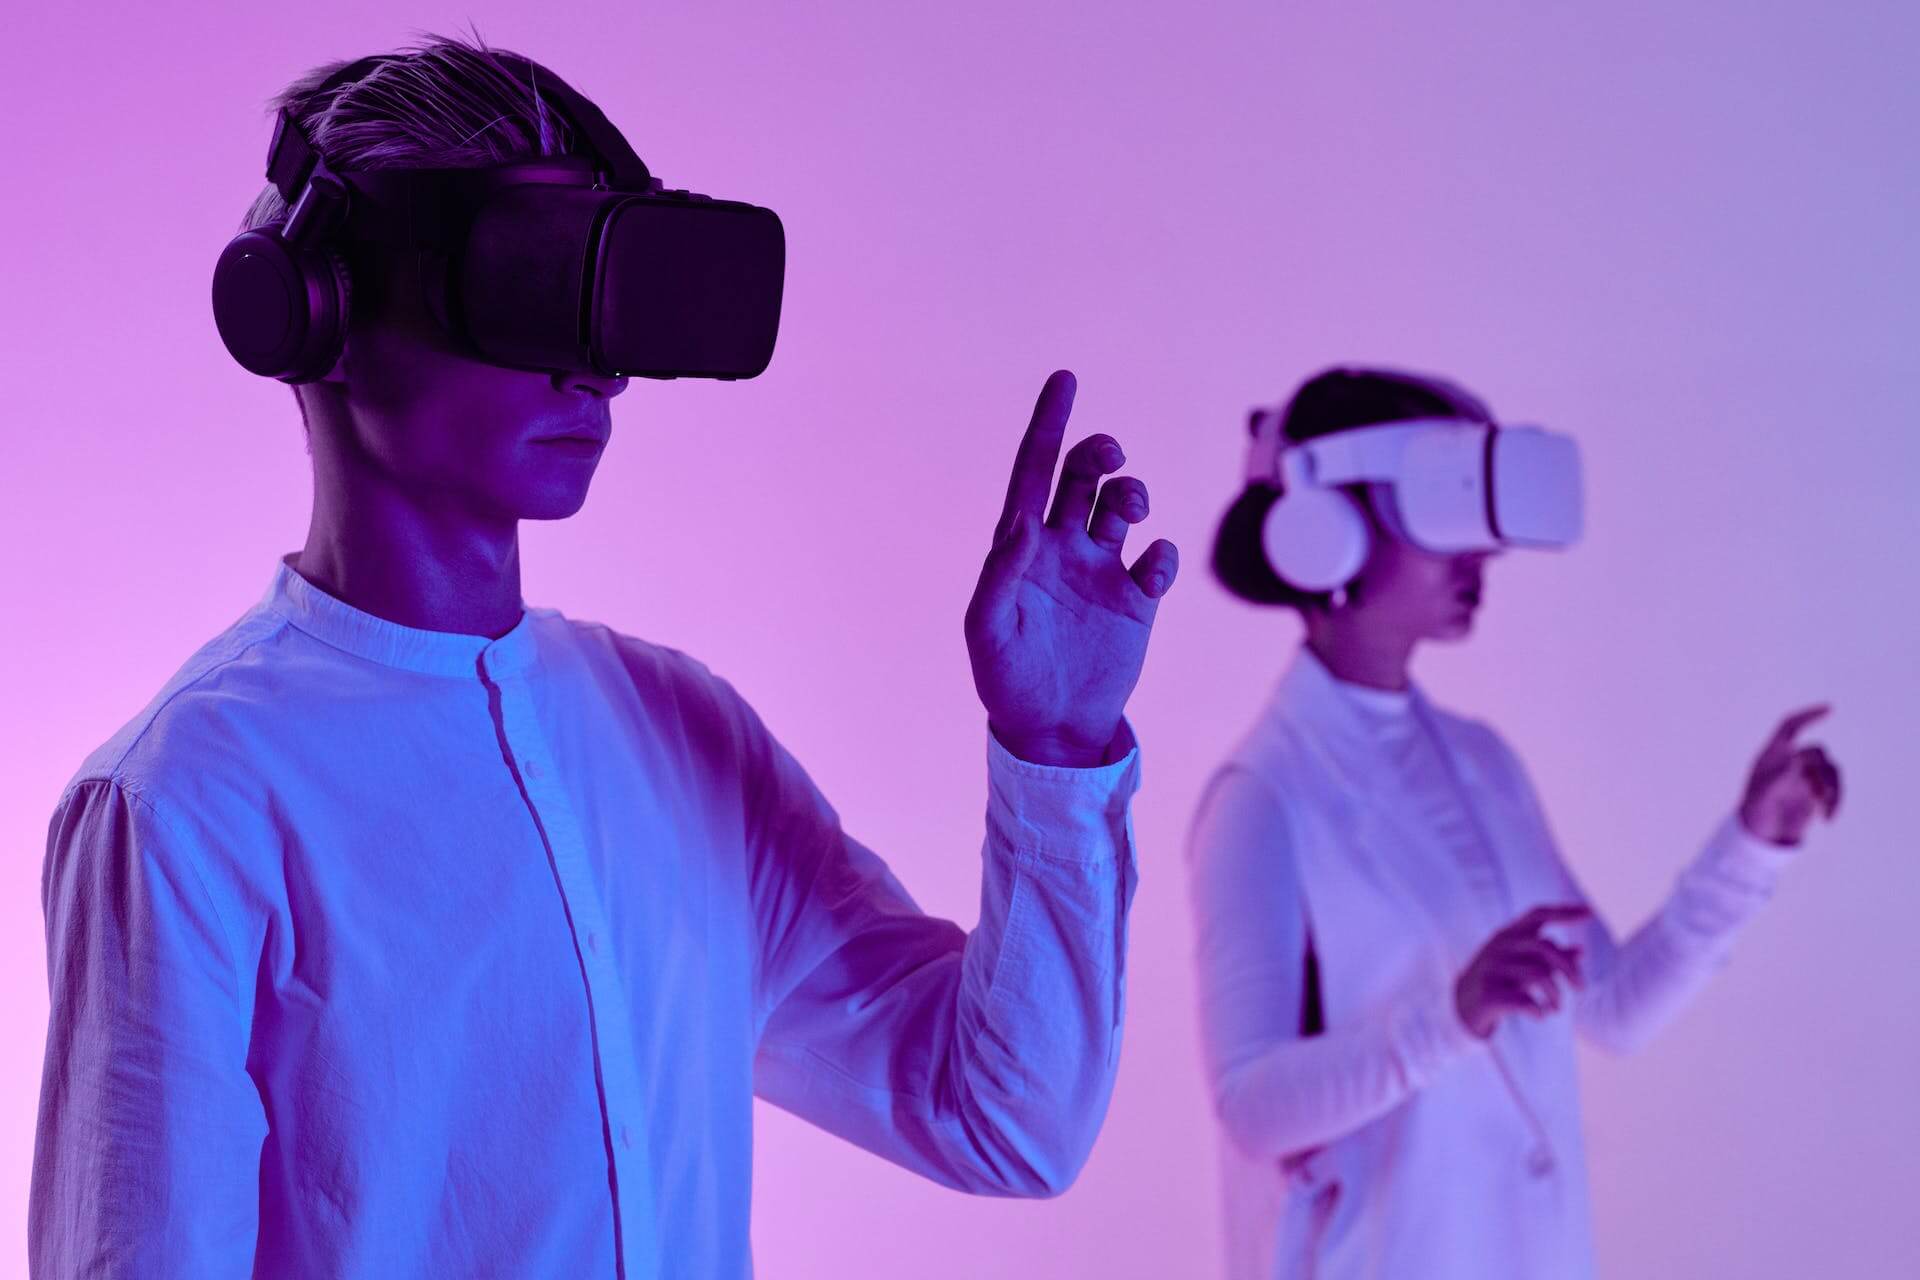 A man and woman with virtual reality goggles. The man is holding up one hand in front of his eyeline. The woman is in the background, slightly out of focus, using both hands to presumably manipulate an interface.